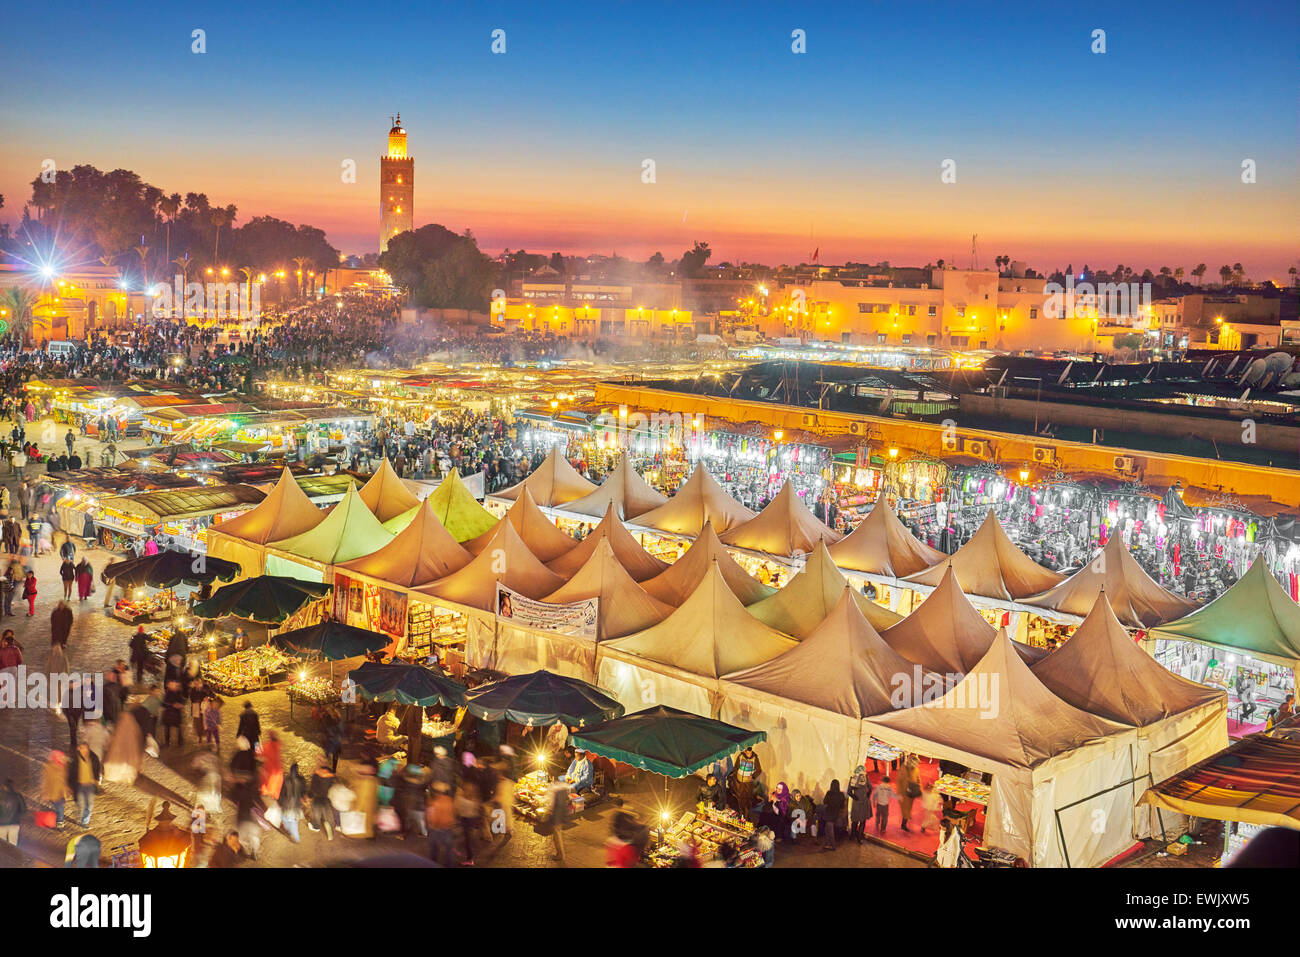 Djemaa el-Fna square at dusk, Marrakech, Morocco, Africa Stock Photo